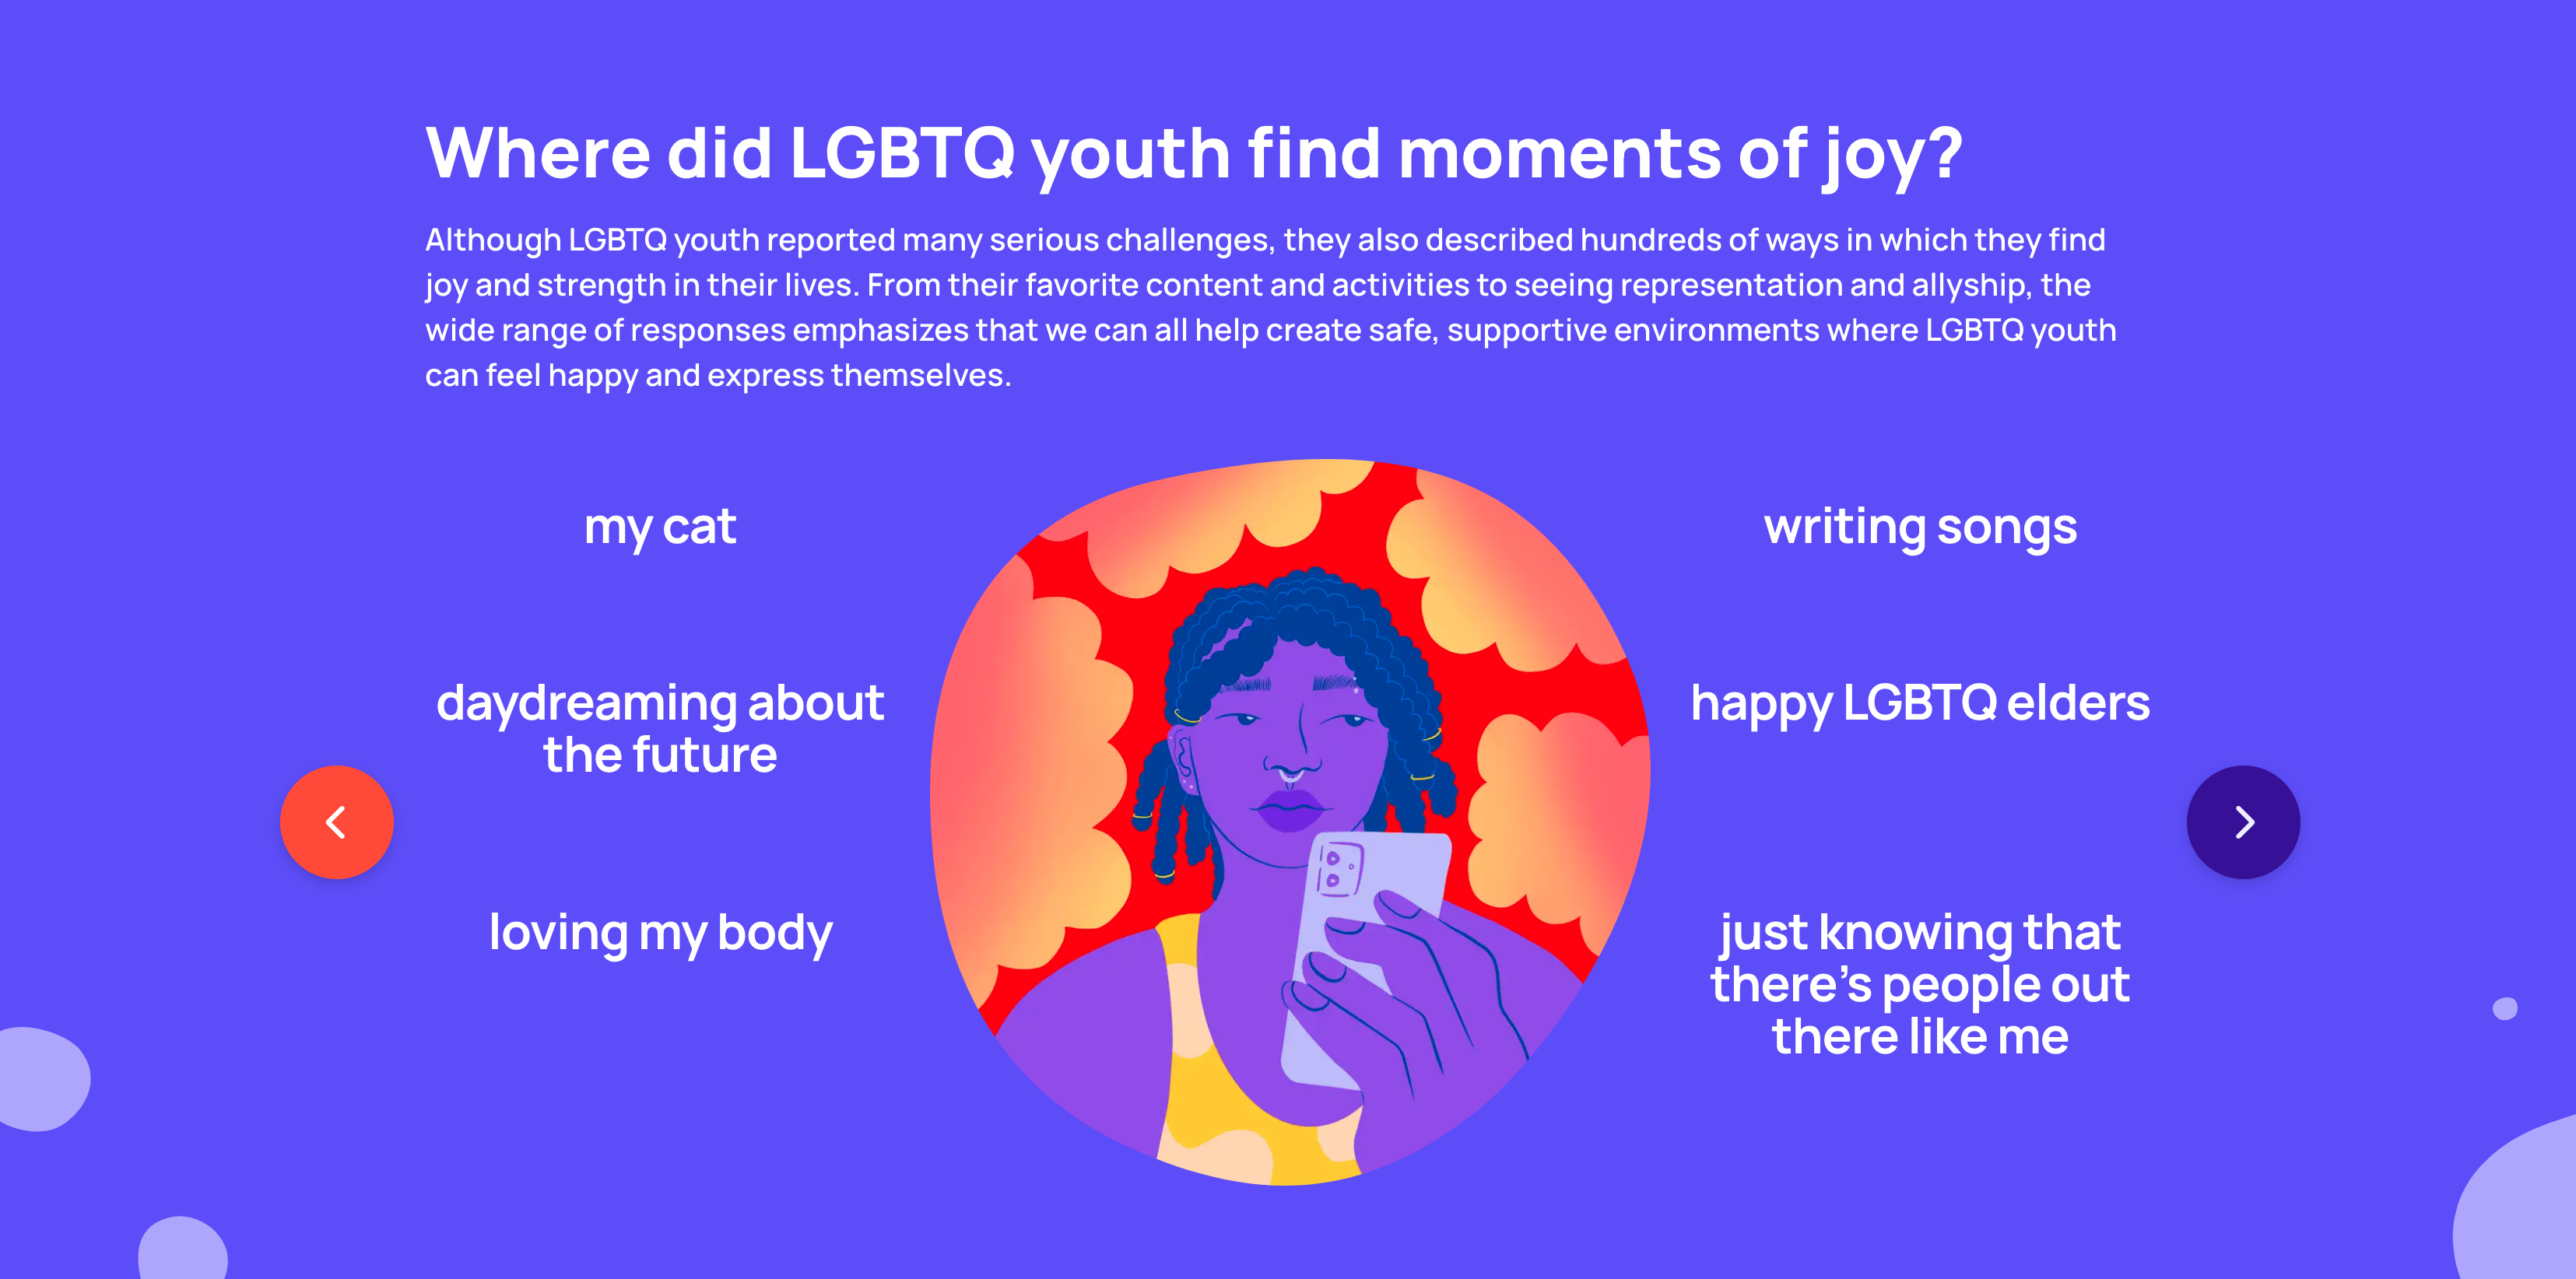 A clickable slideshow displaying text responses for where LGBTQ youth find moments of joy.